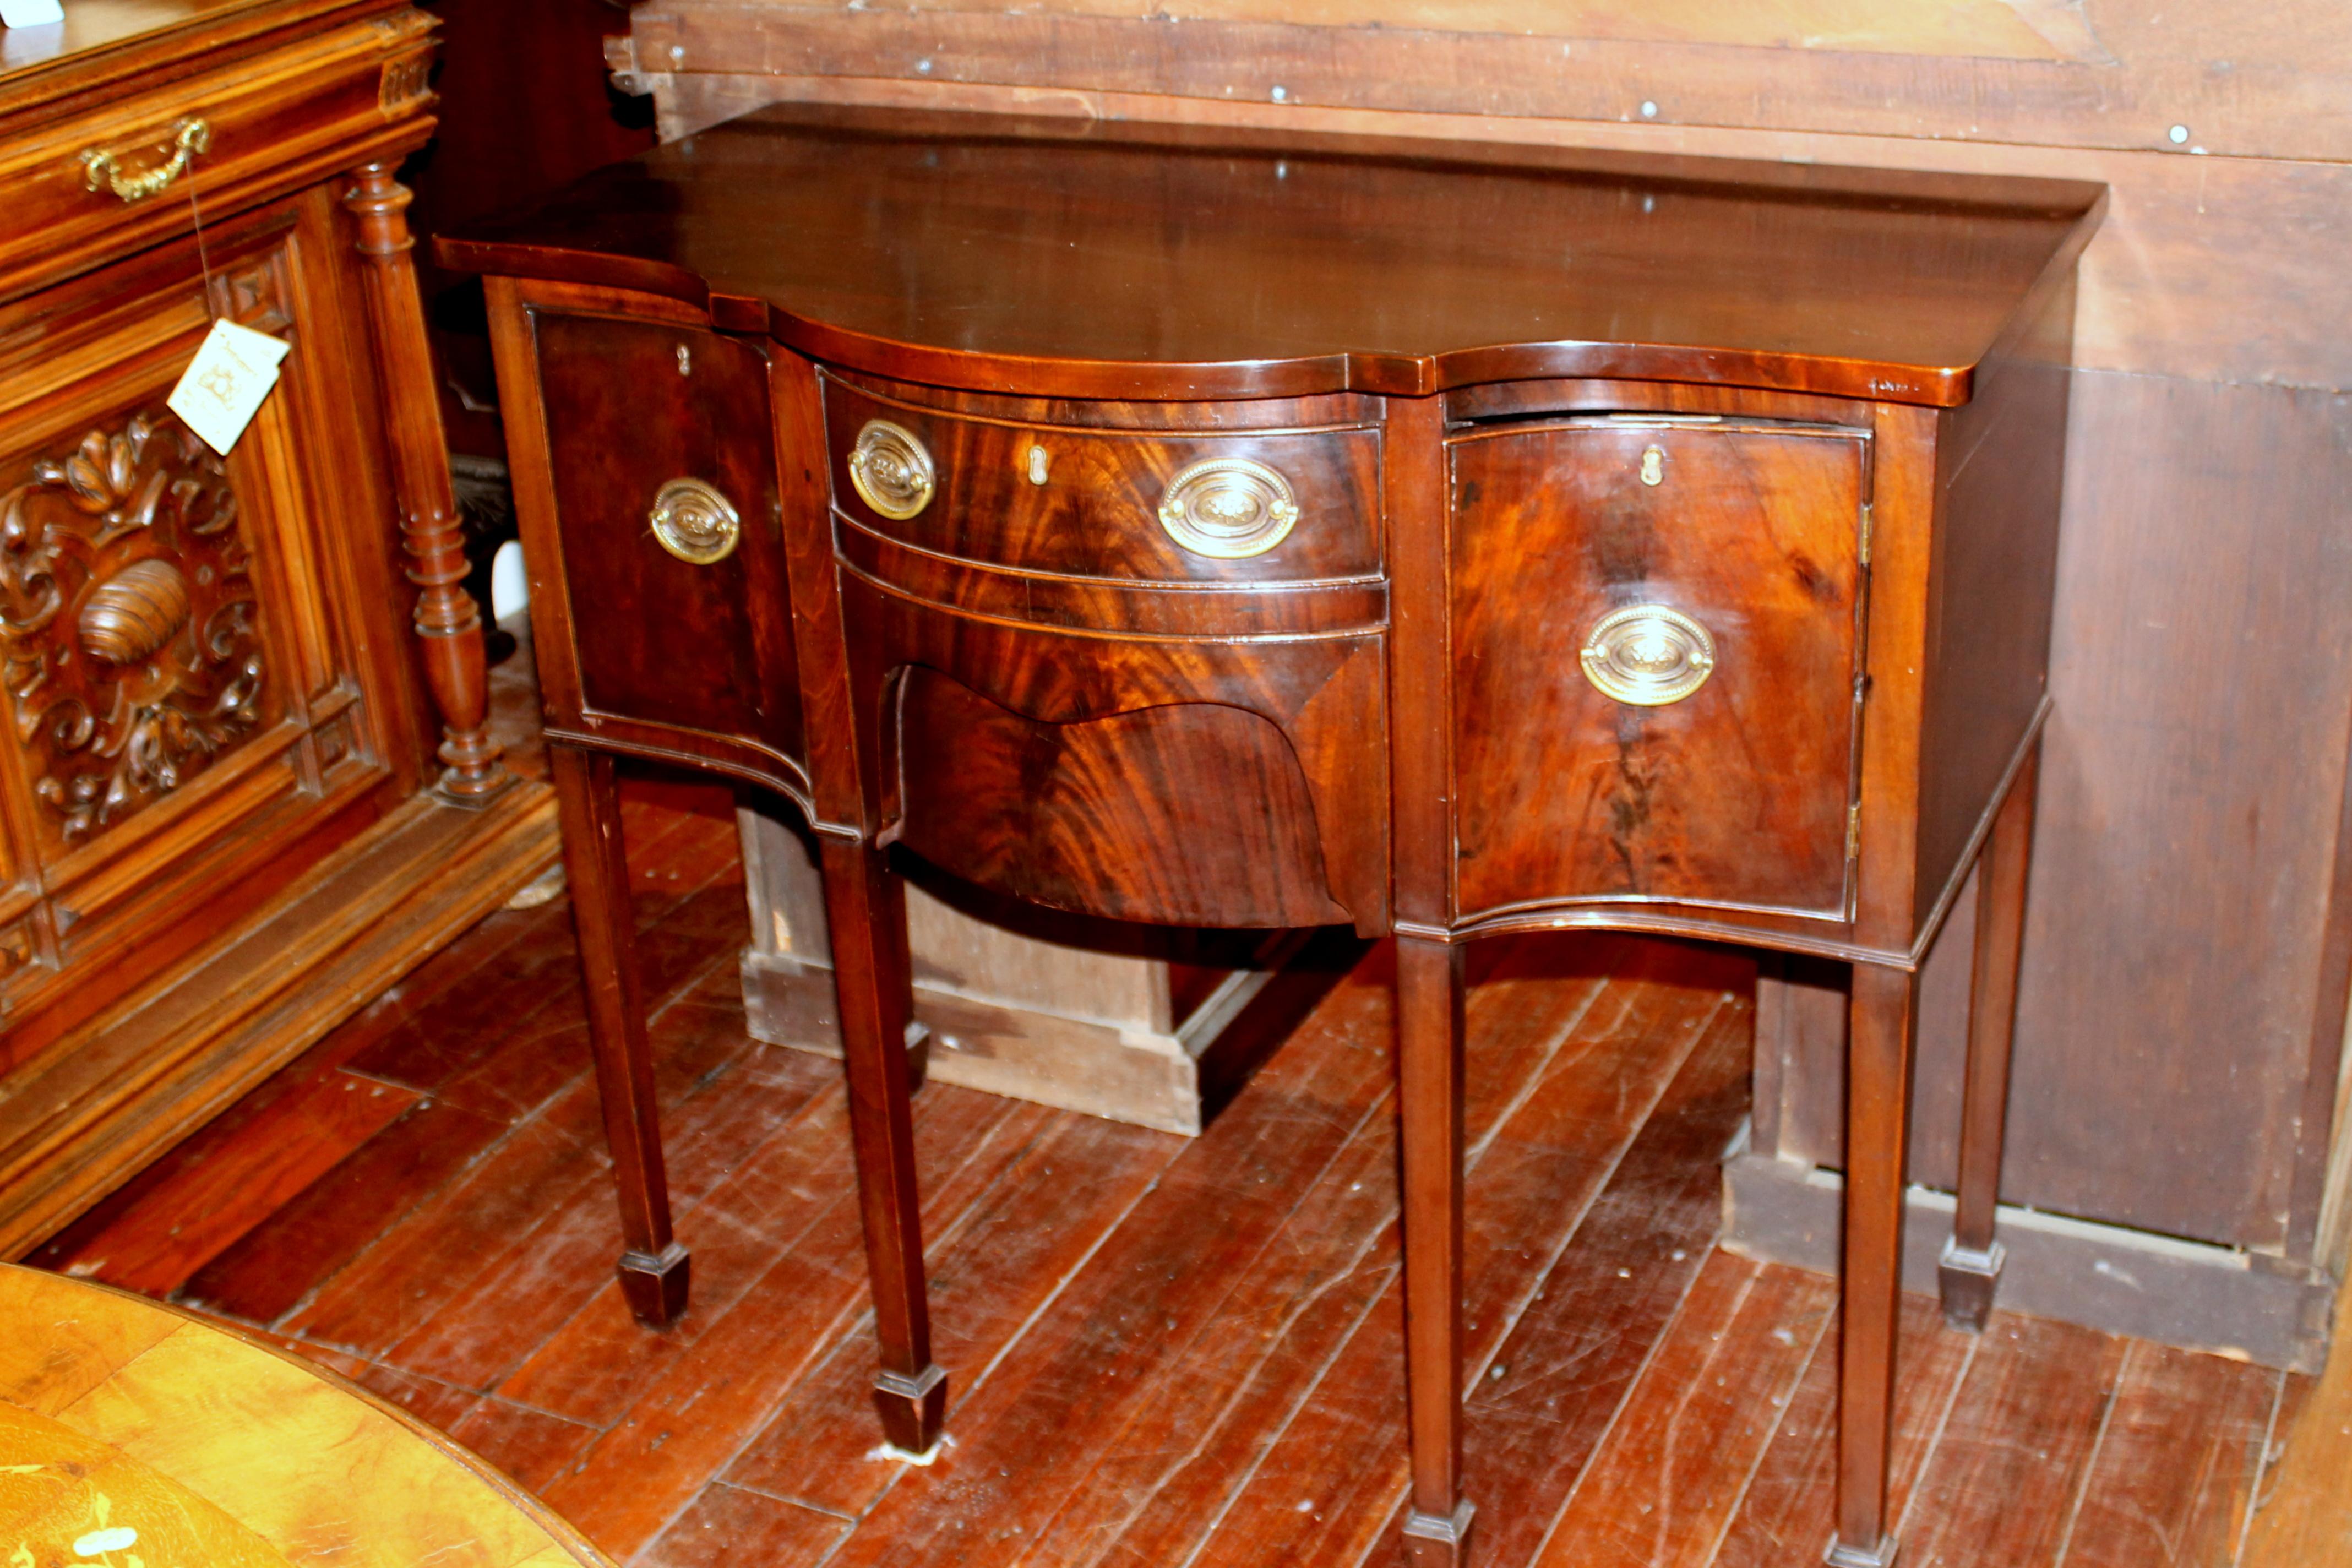 Superb and rare antique English George IV diminutive size highly figured mahogany Hepplewhite style serpentine sideboard. Unusual, small size with fabulous deep serpentine shaped front.

Please note the wonderful, useful lower center storage